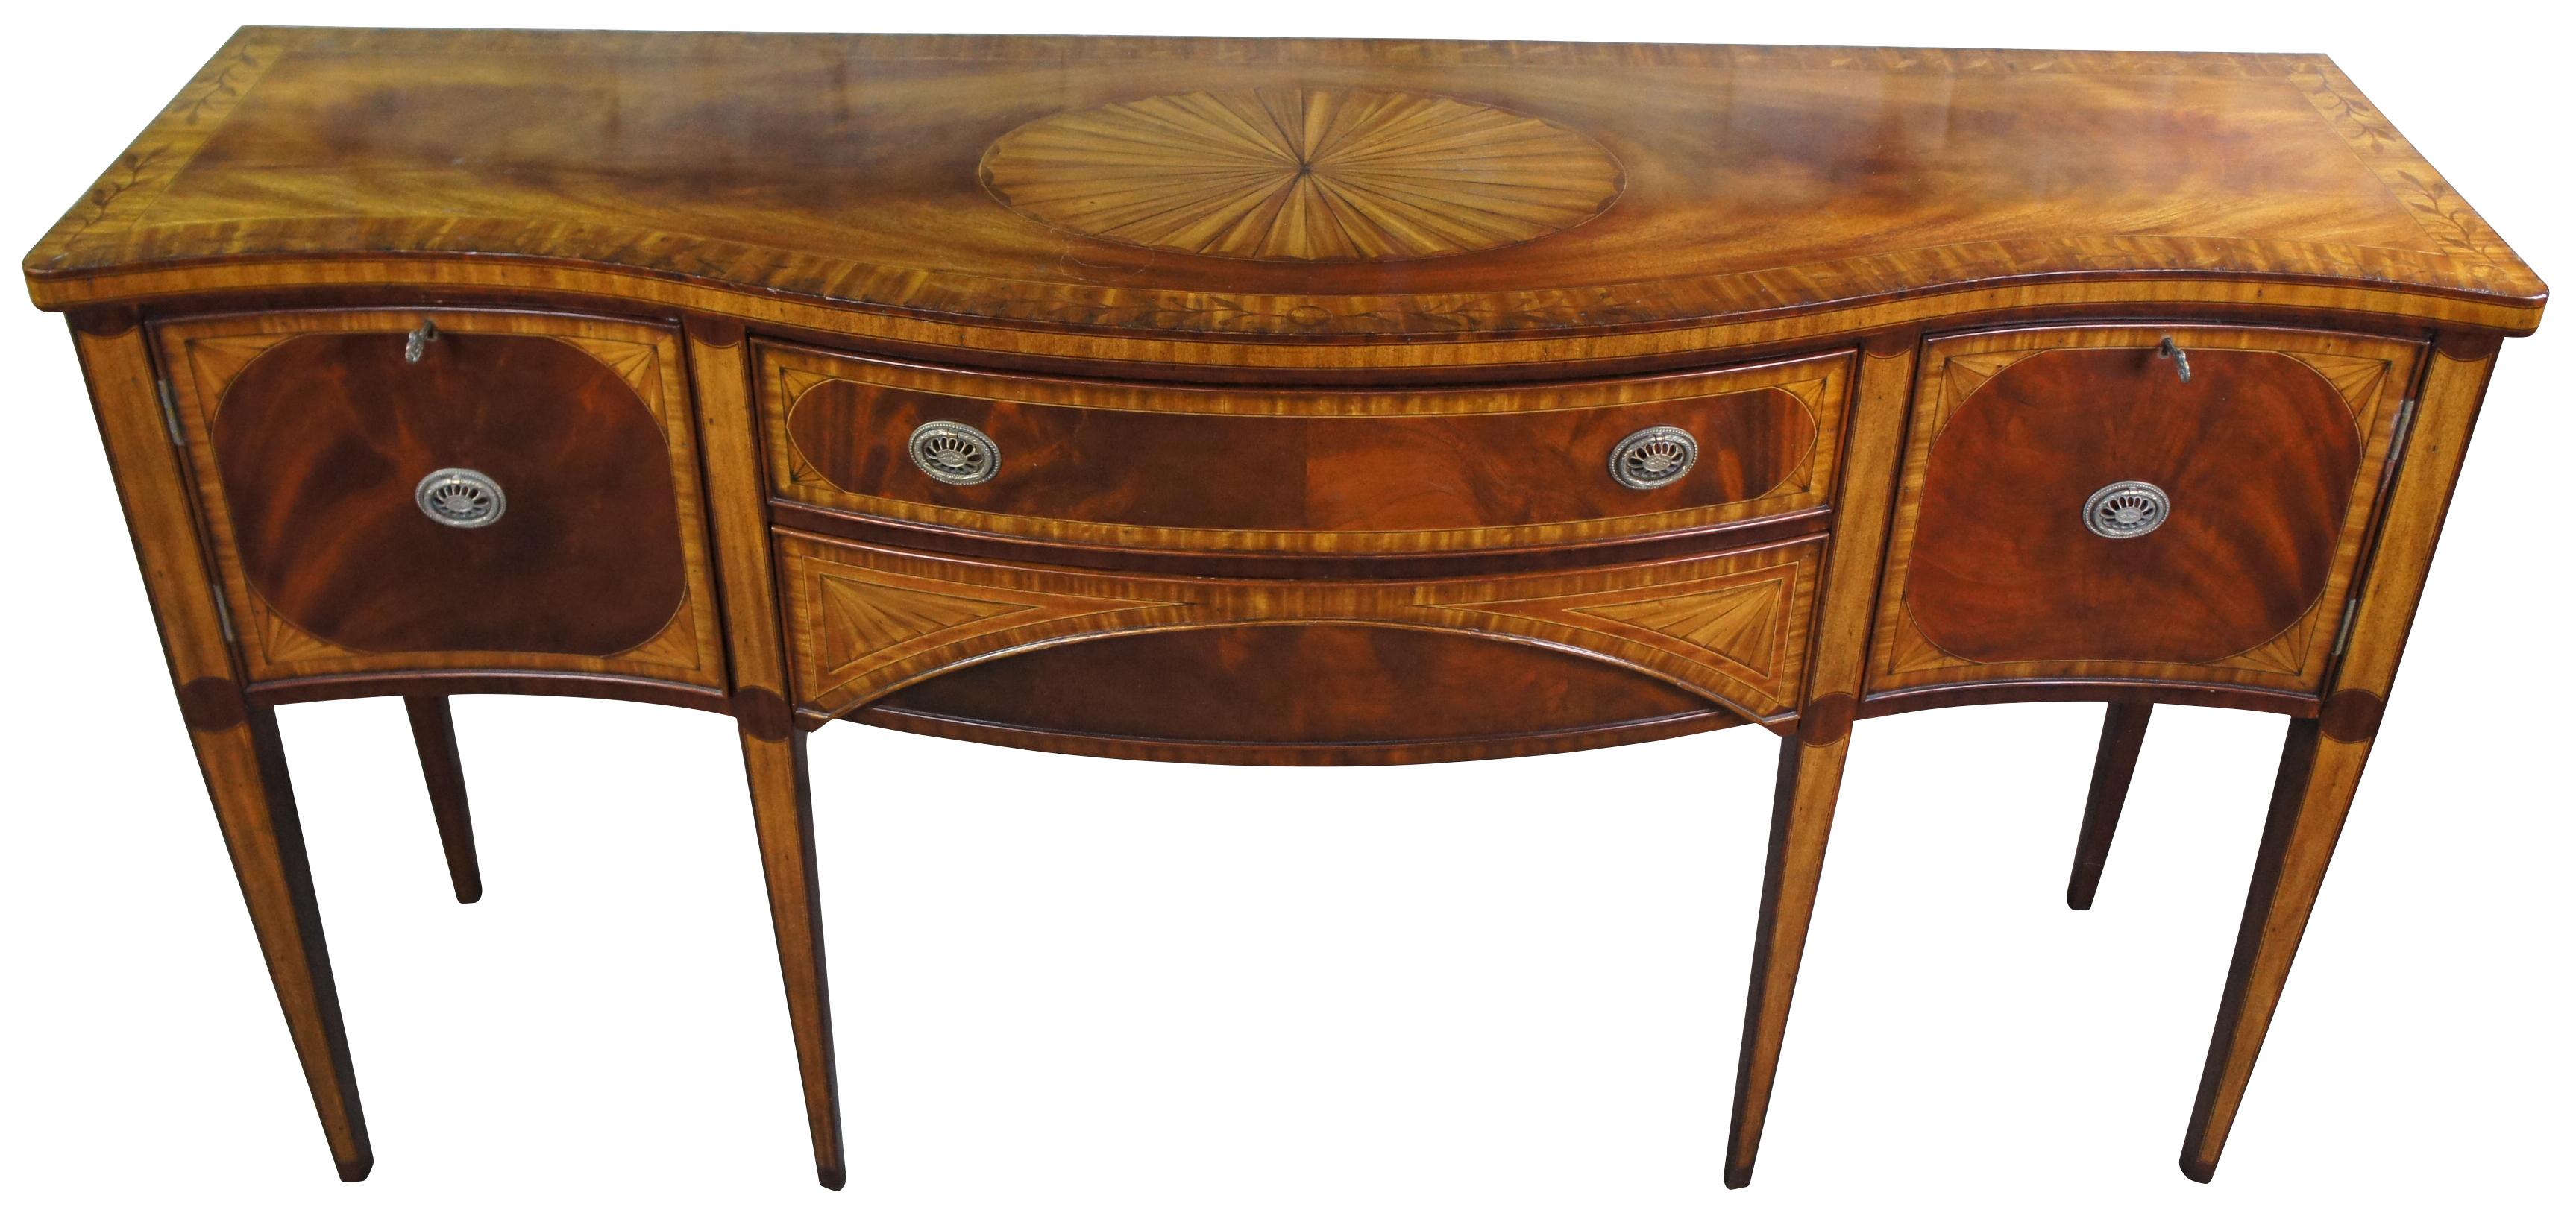 An impressive Hepplewhite or Sheraton inspired sideboard / server. Features a serpentine bowfront form made from mahogany with crotch veener fronts, elegant banding, floral and classic fan inlays. Includes two central drawers flanked by lockable